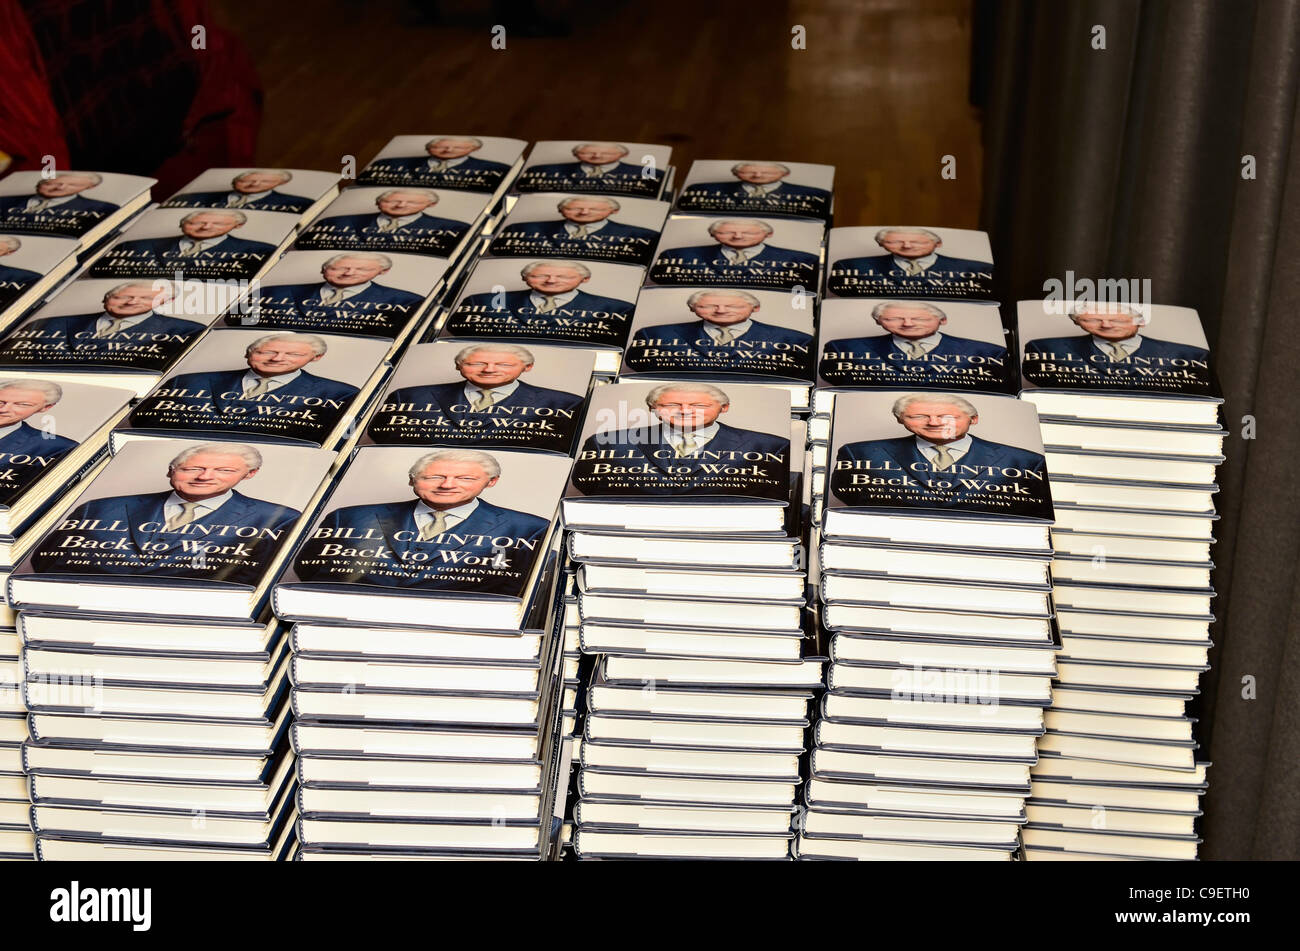 Stacks piles copies of President Bill Clinton's book Back to Work stacked up in rows at his hometown library in Chappaqua New York for book signing. More than 500 people attended the book signing on Friday, December 9, 2011. President Clinton donated 10% of the profits from books sold to the library Stock Photo